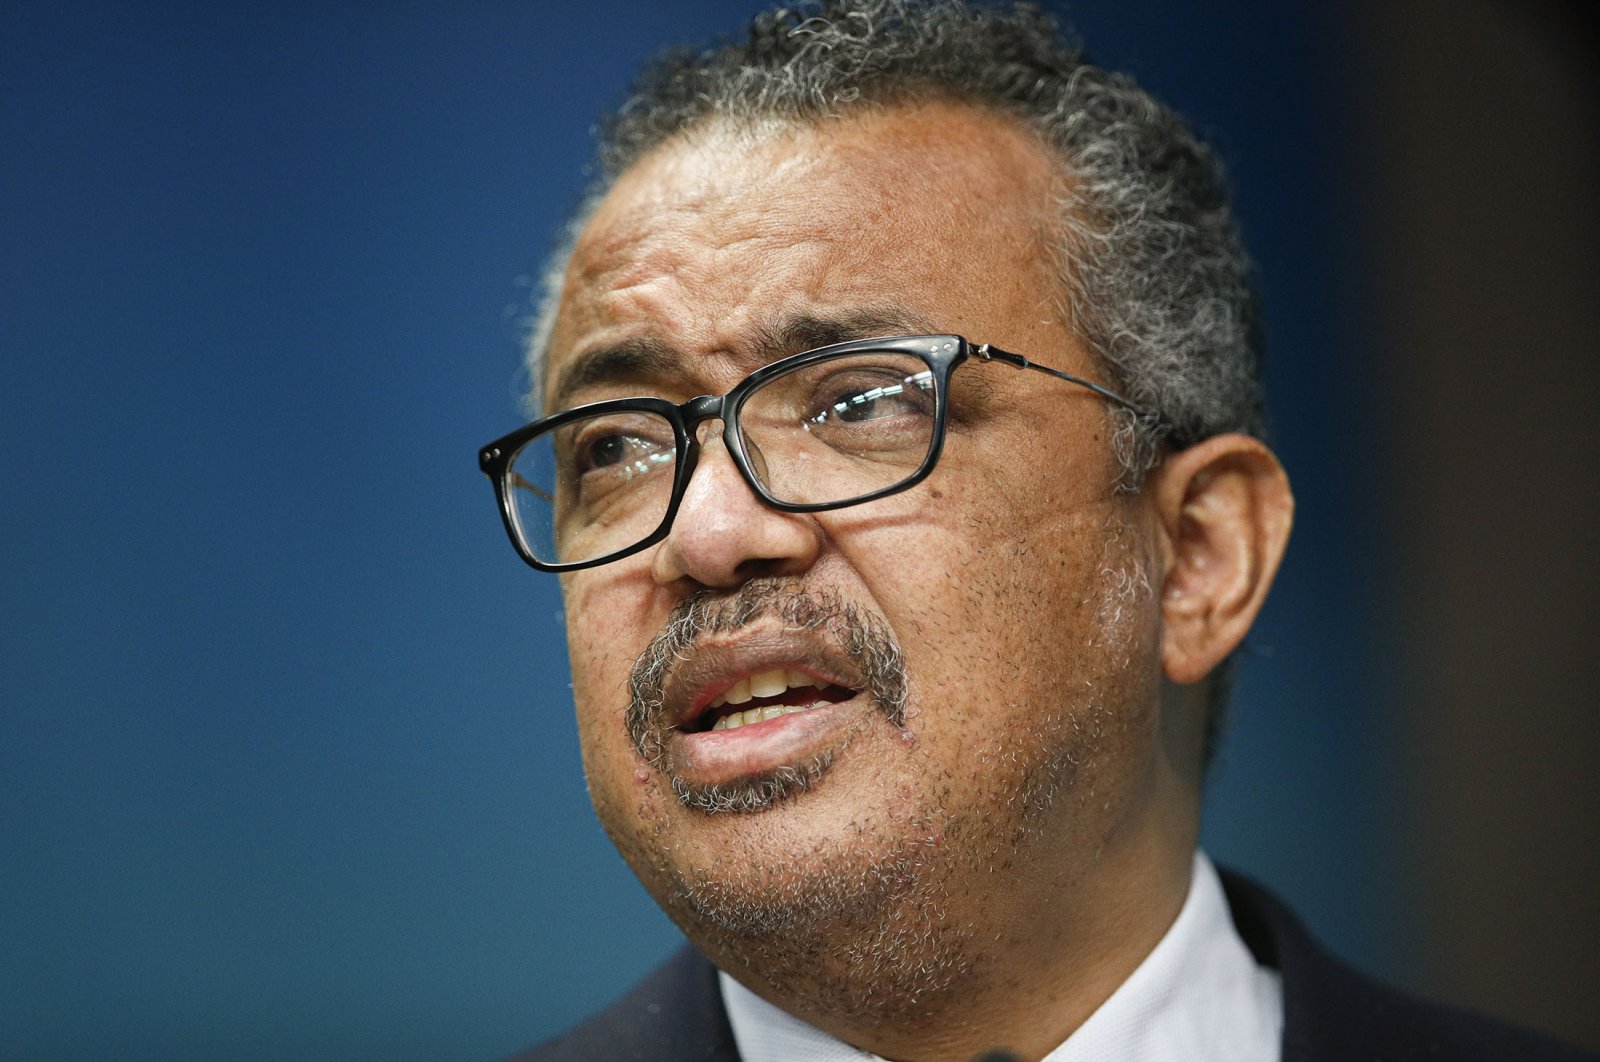 The head of the World Health Organization, Tedros Adhanom Ghebreyesus speaks during a media conference at a summit in Brussels, Belgium, Feb. 18, 2022. (AP Photo)